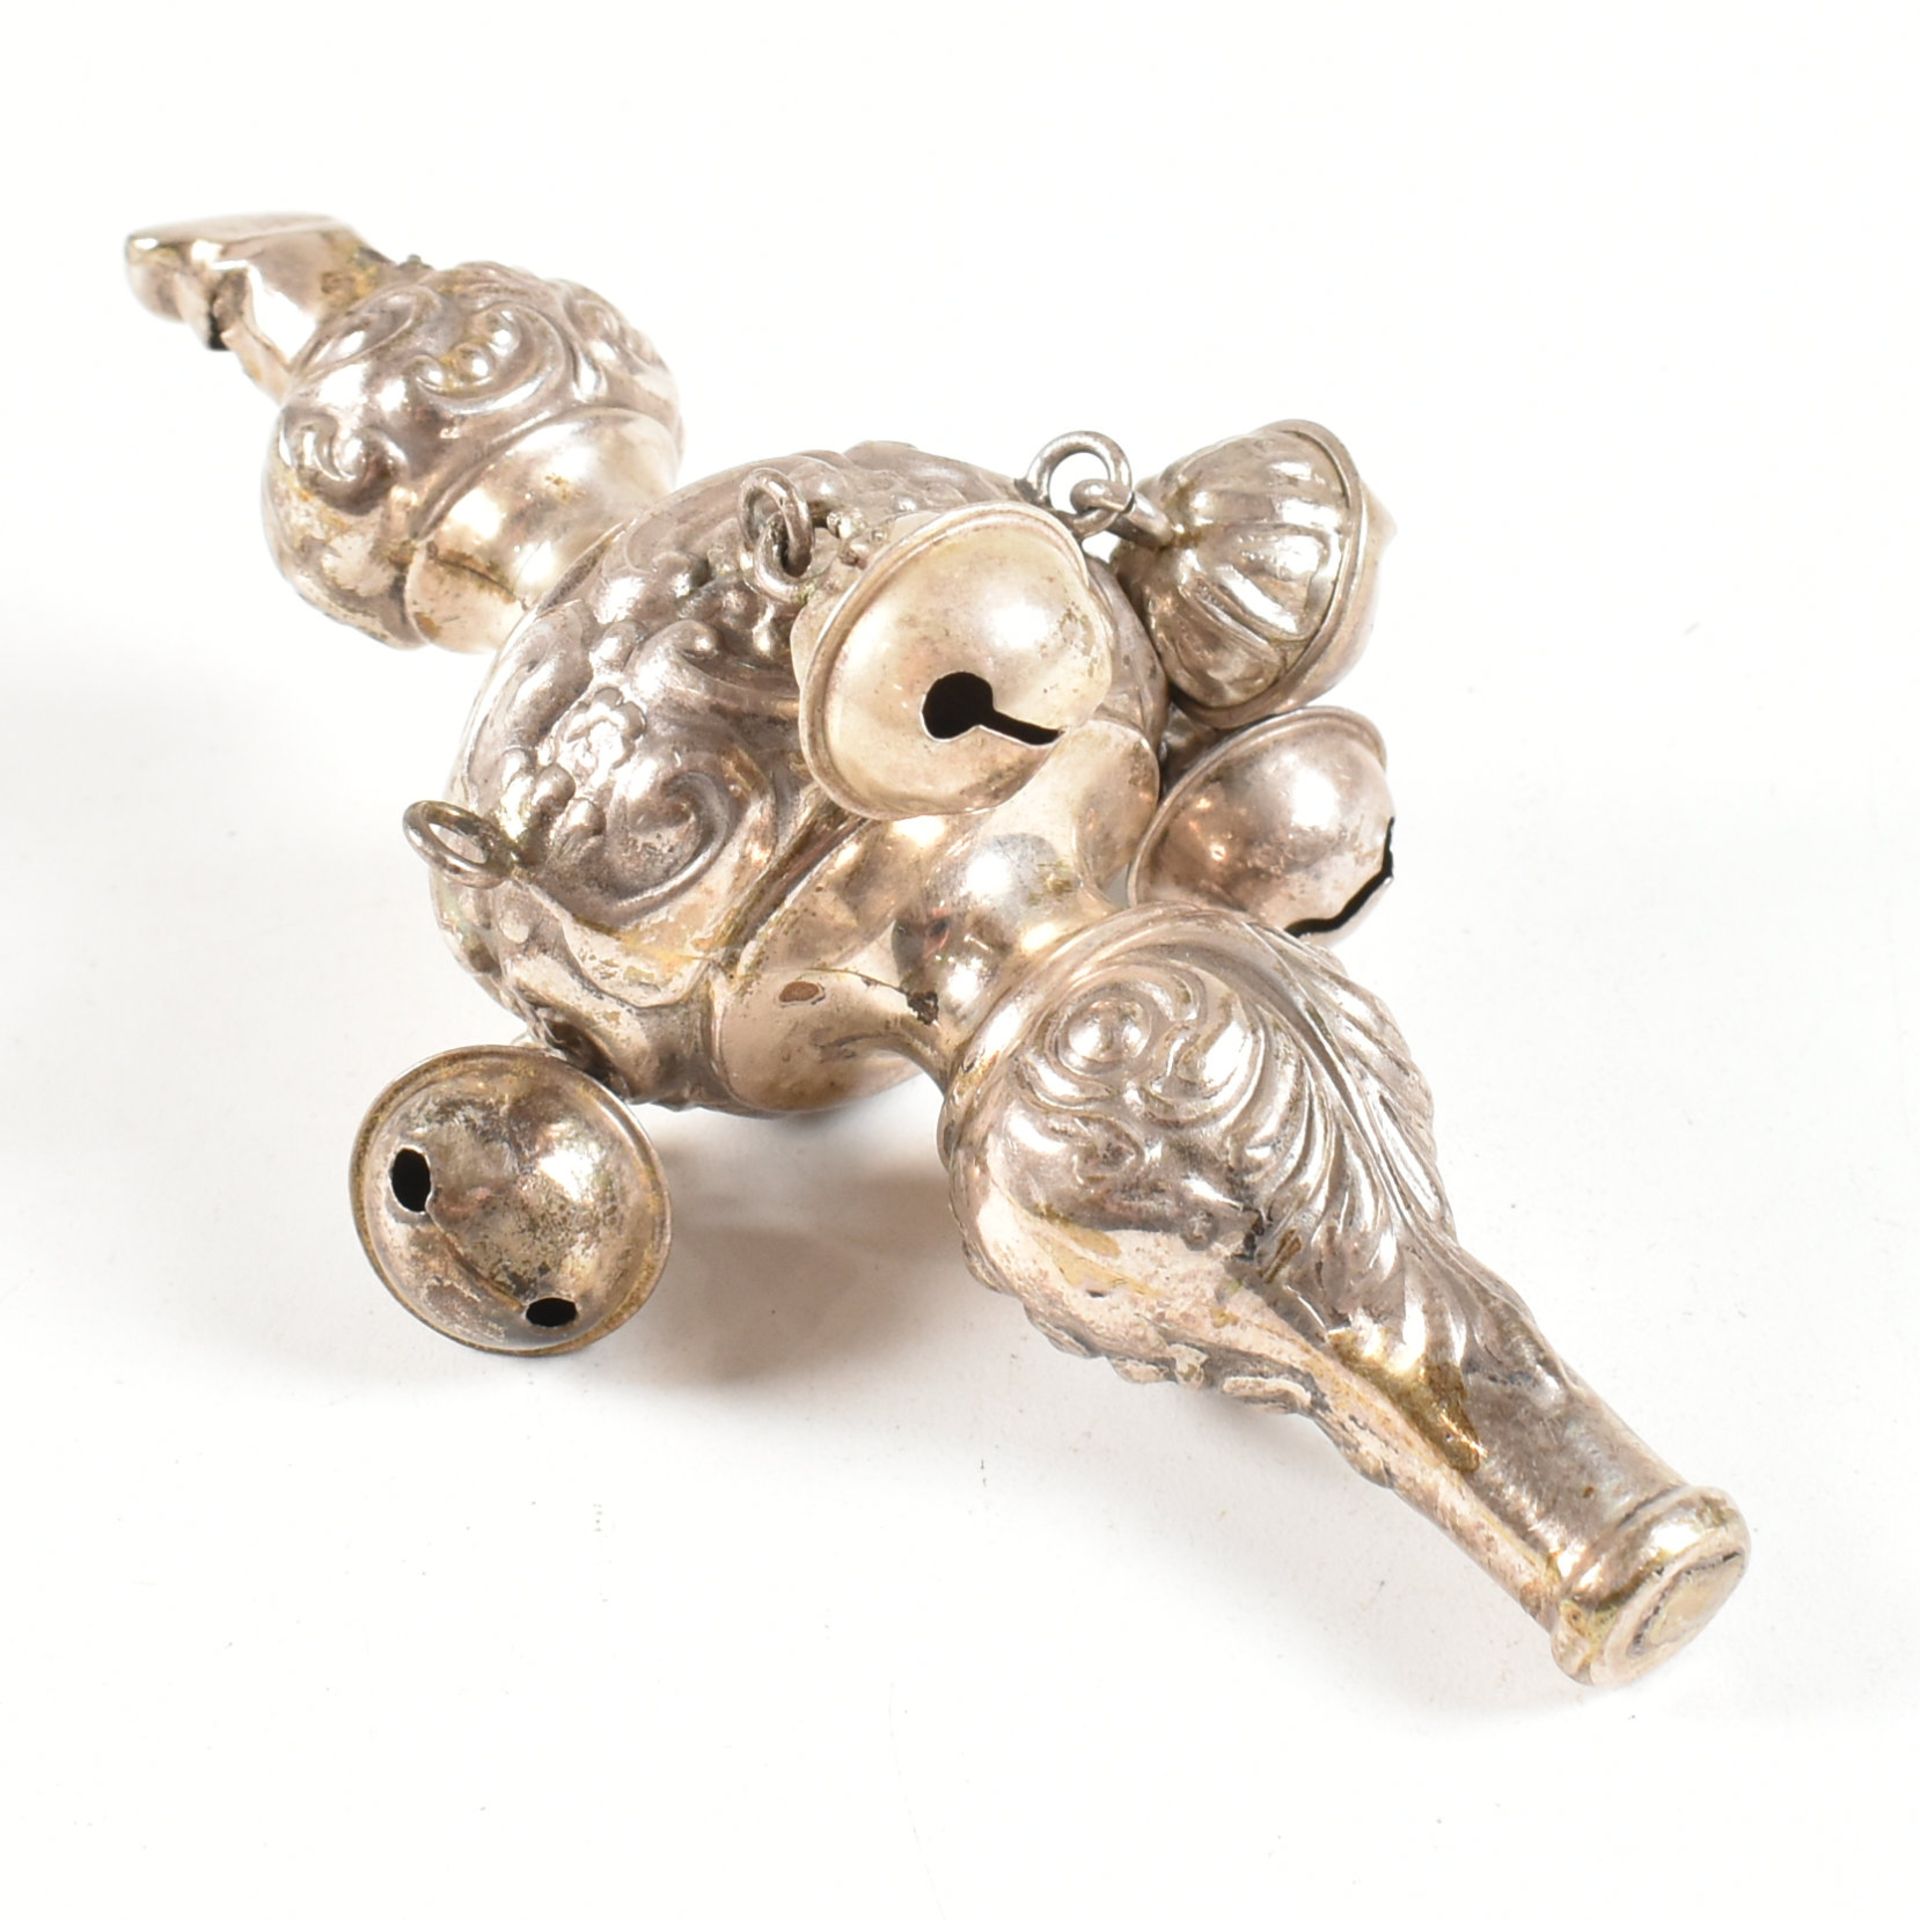 GEORGE V HALLMARKED SILVER BABYS COMBINATION RATTLE WHISTLE - Image 2 of 6